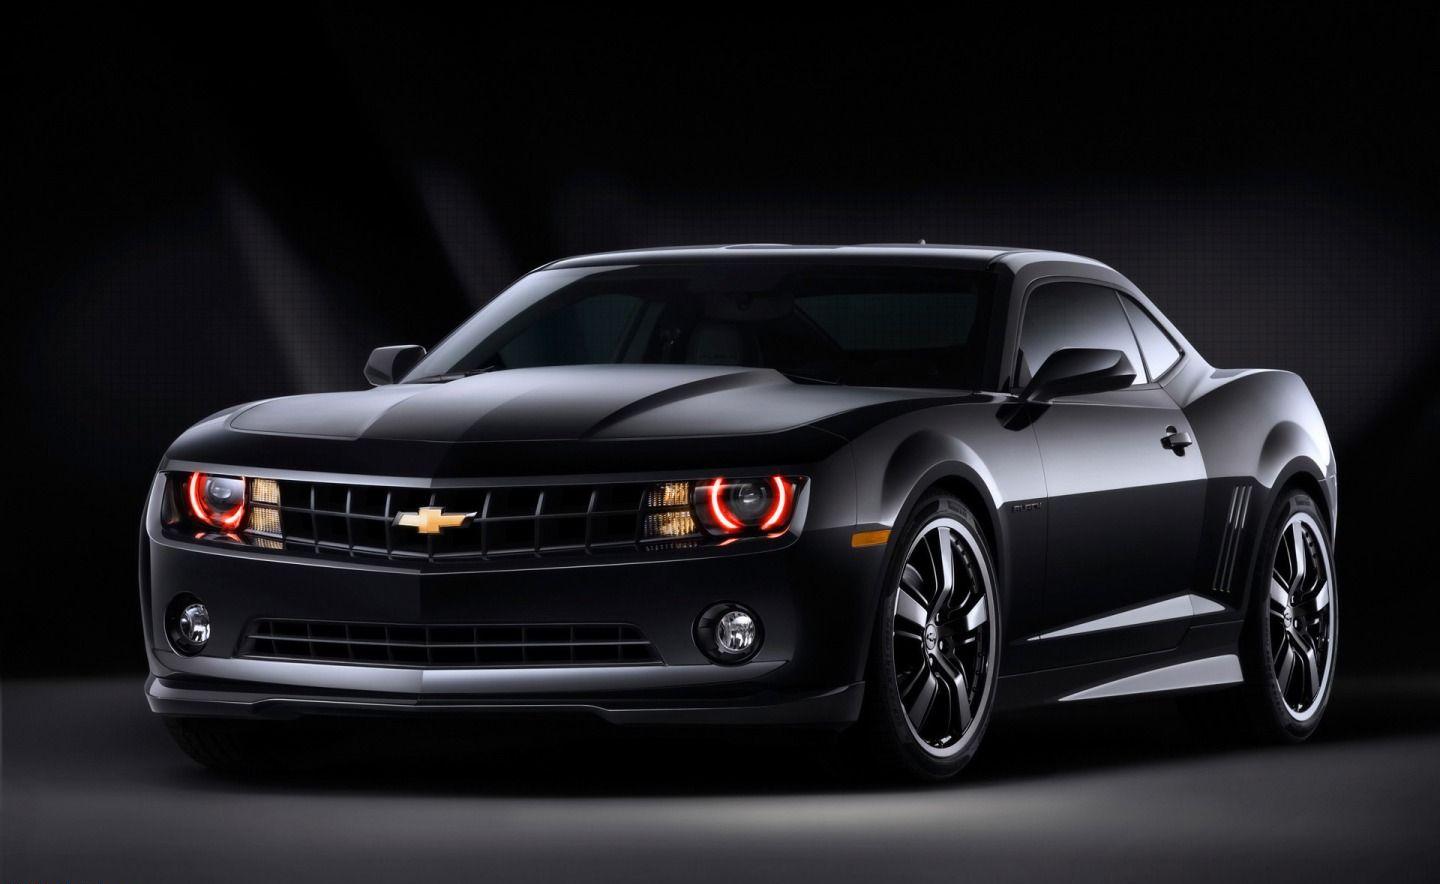 Download full size Chevrolet wallpaper / Cars / 1440x884